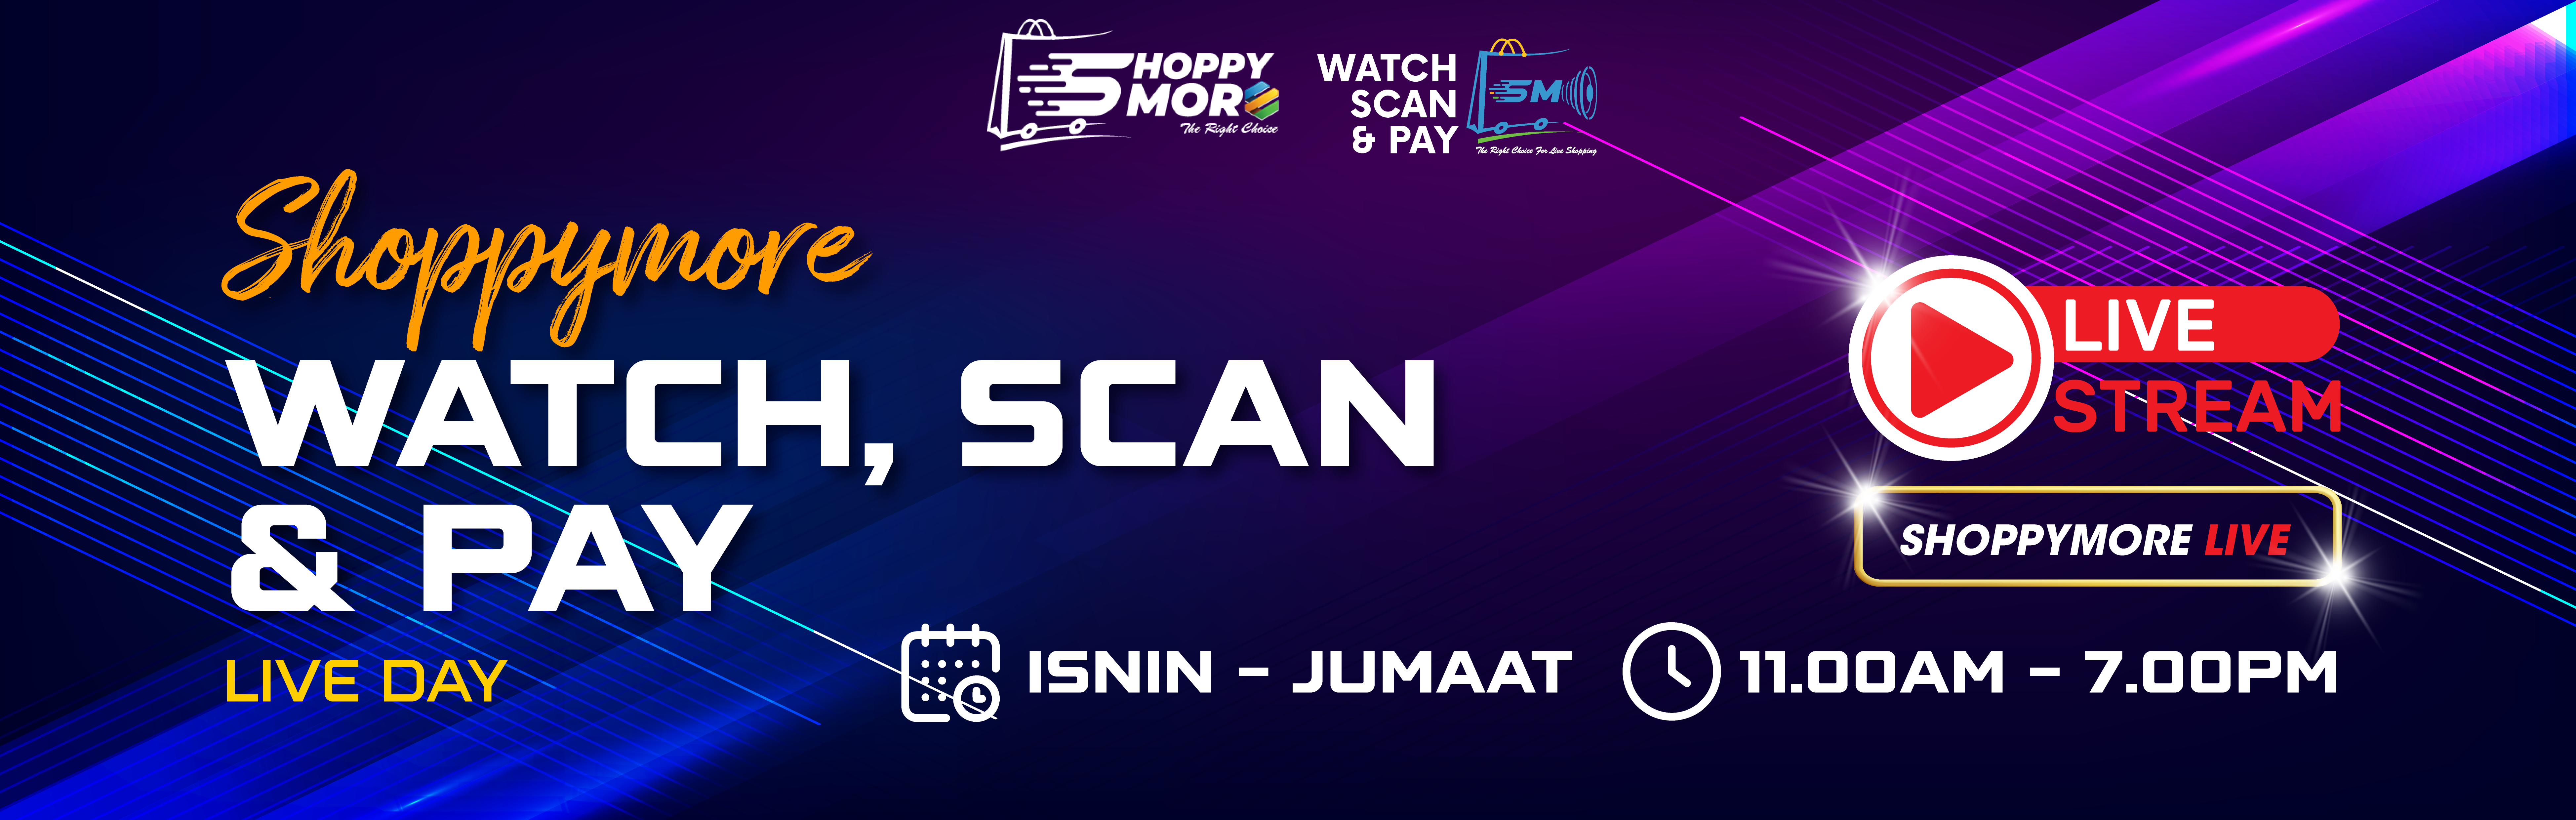 watch,scan and pay banner